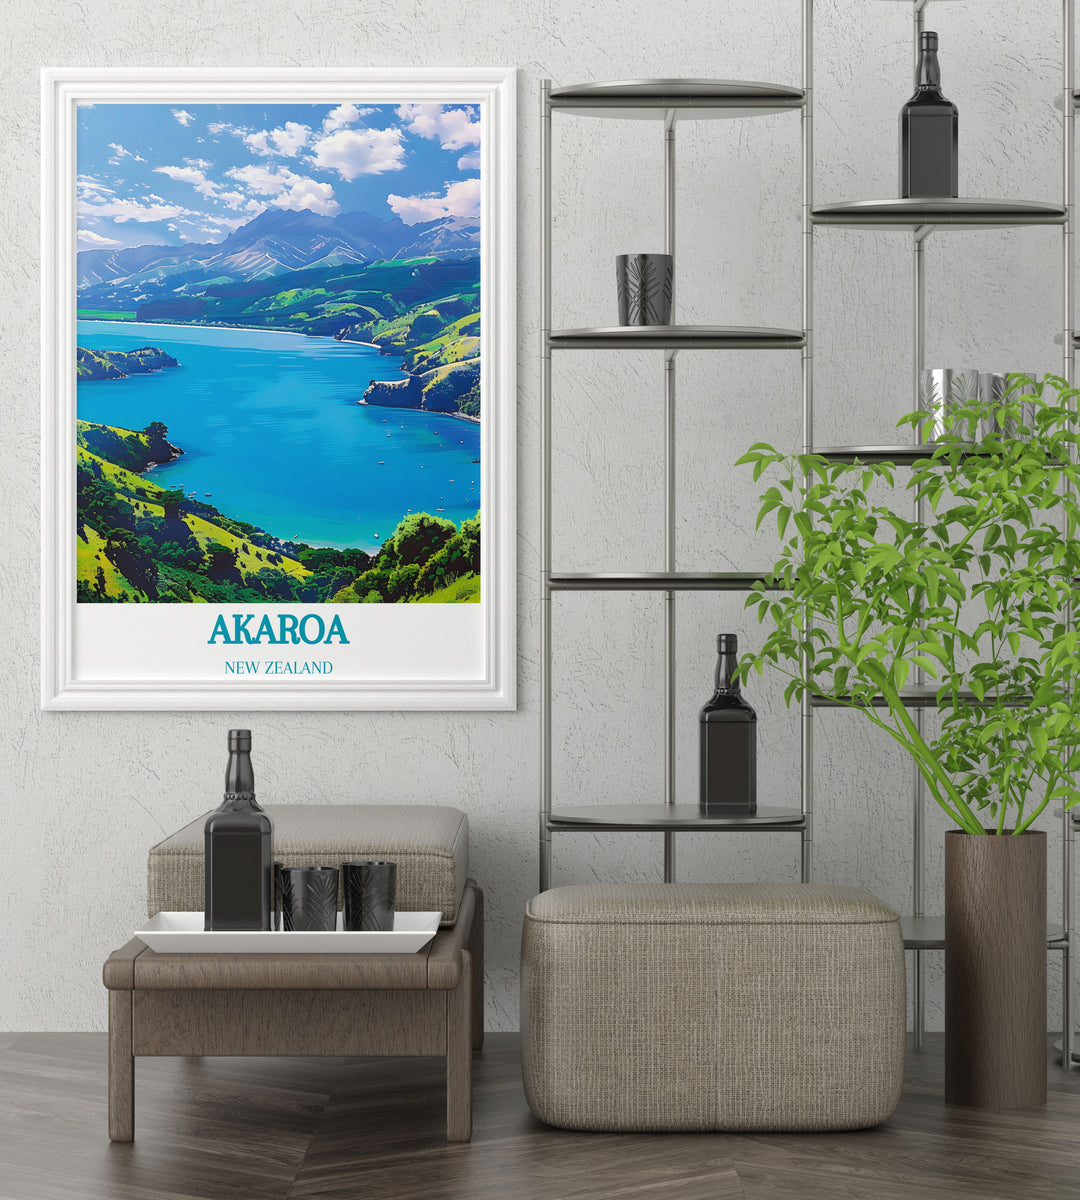 Canvas art of New Zealand, depicting the tranquil landscapes and vibrant marine life of Akaroa Harbour.